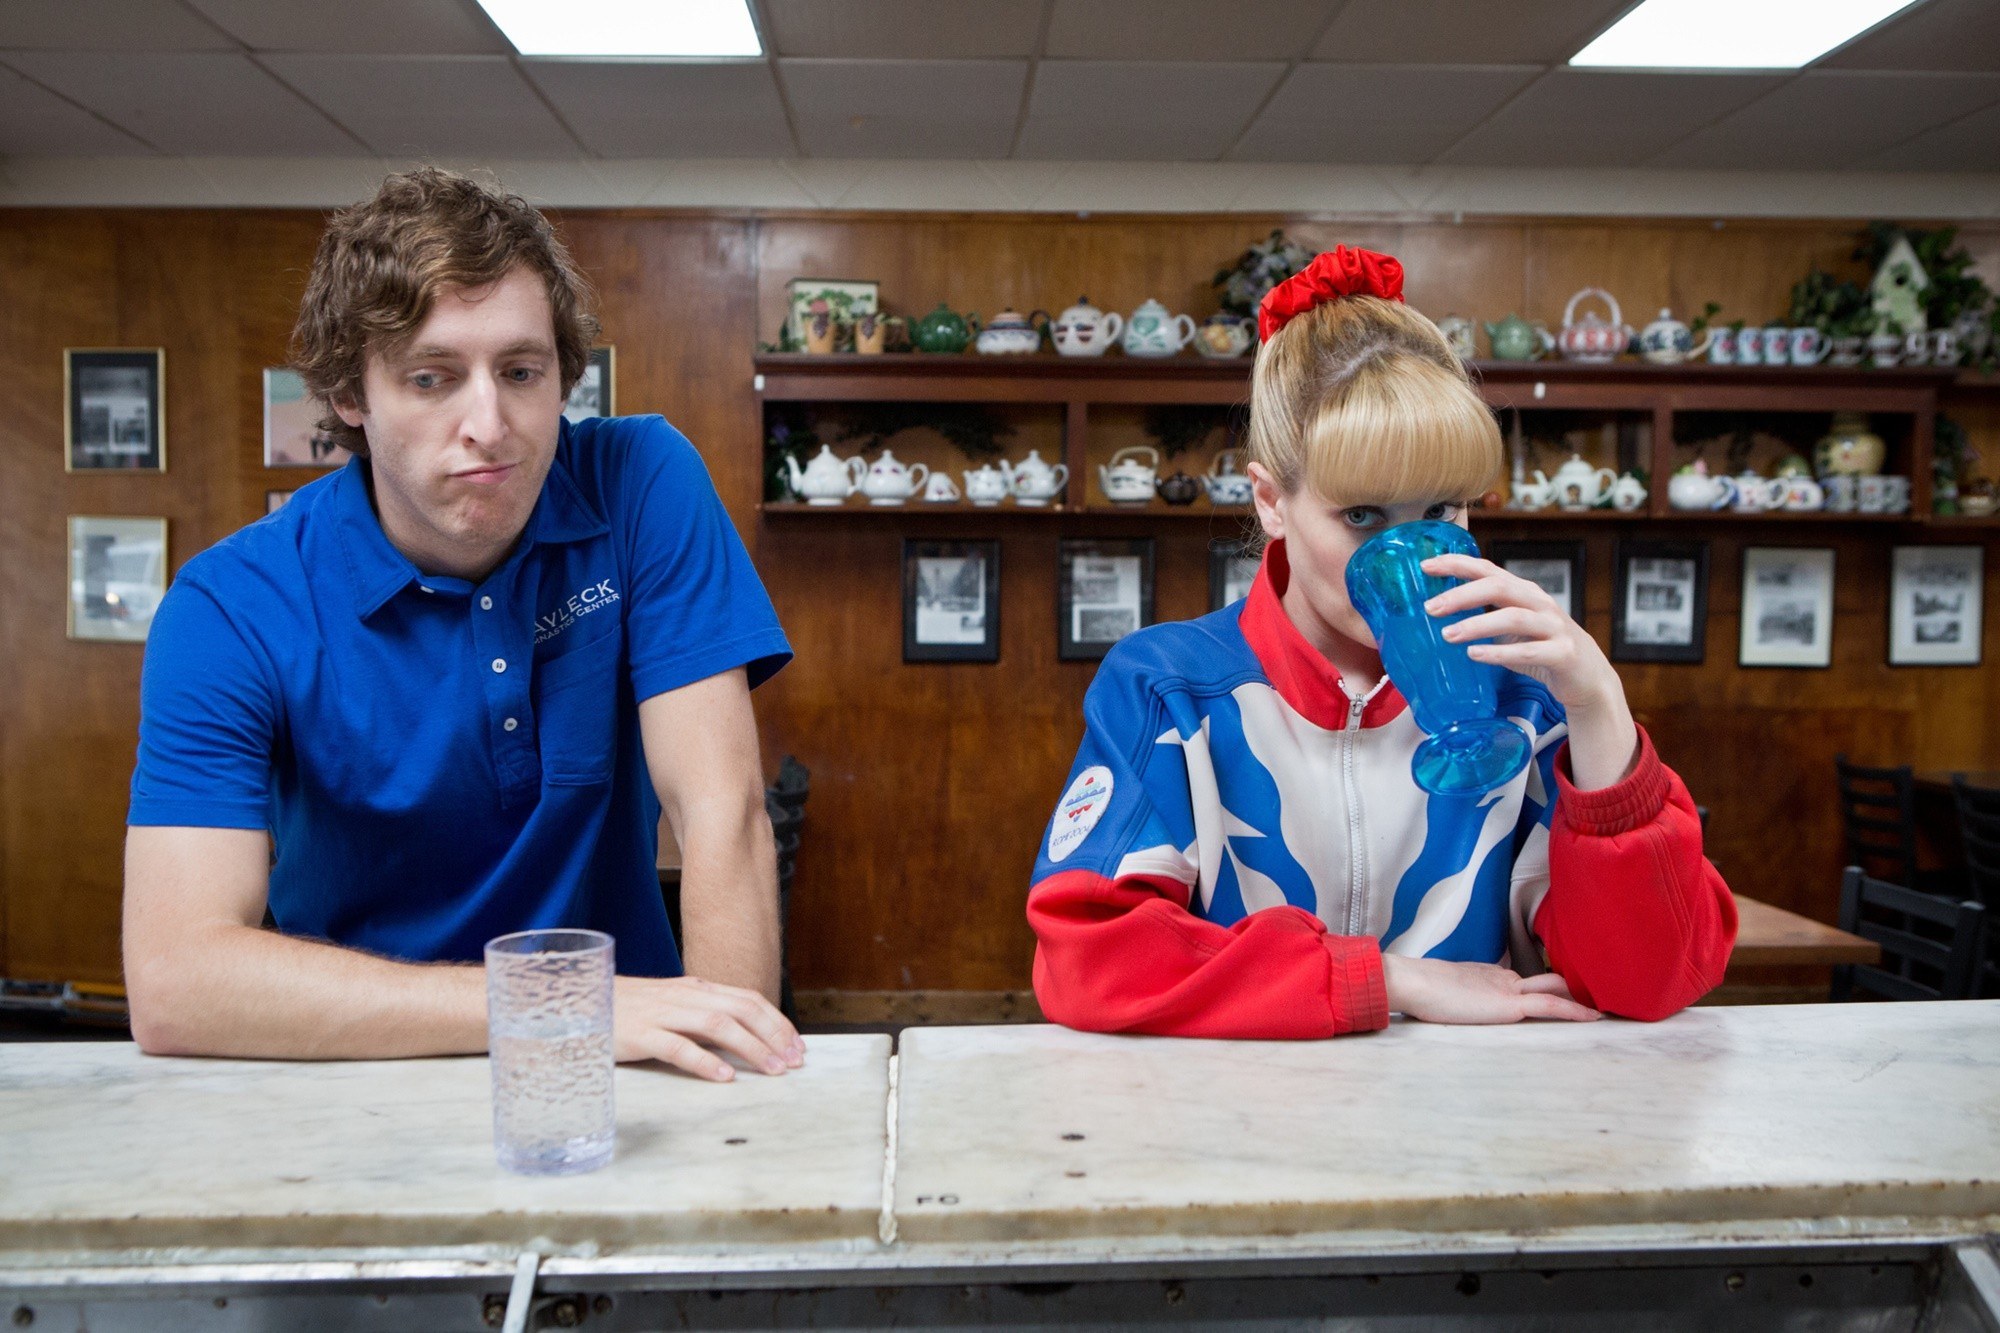 Thomas Middleditch stars as Ben and Melissa Rauch stars as Hope Annabelle Greggory in Sony Pictures Classics' The Bronze (2016)